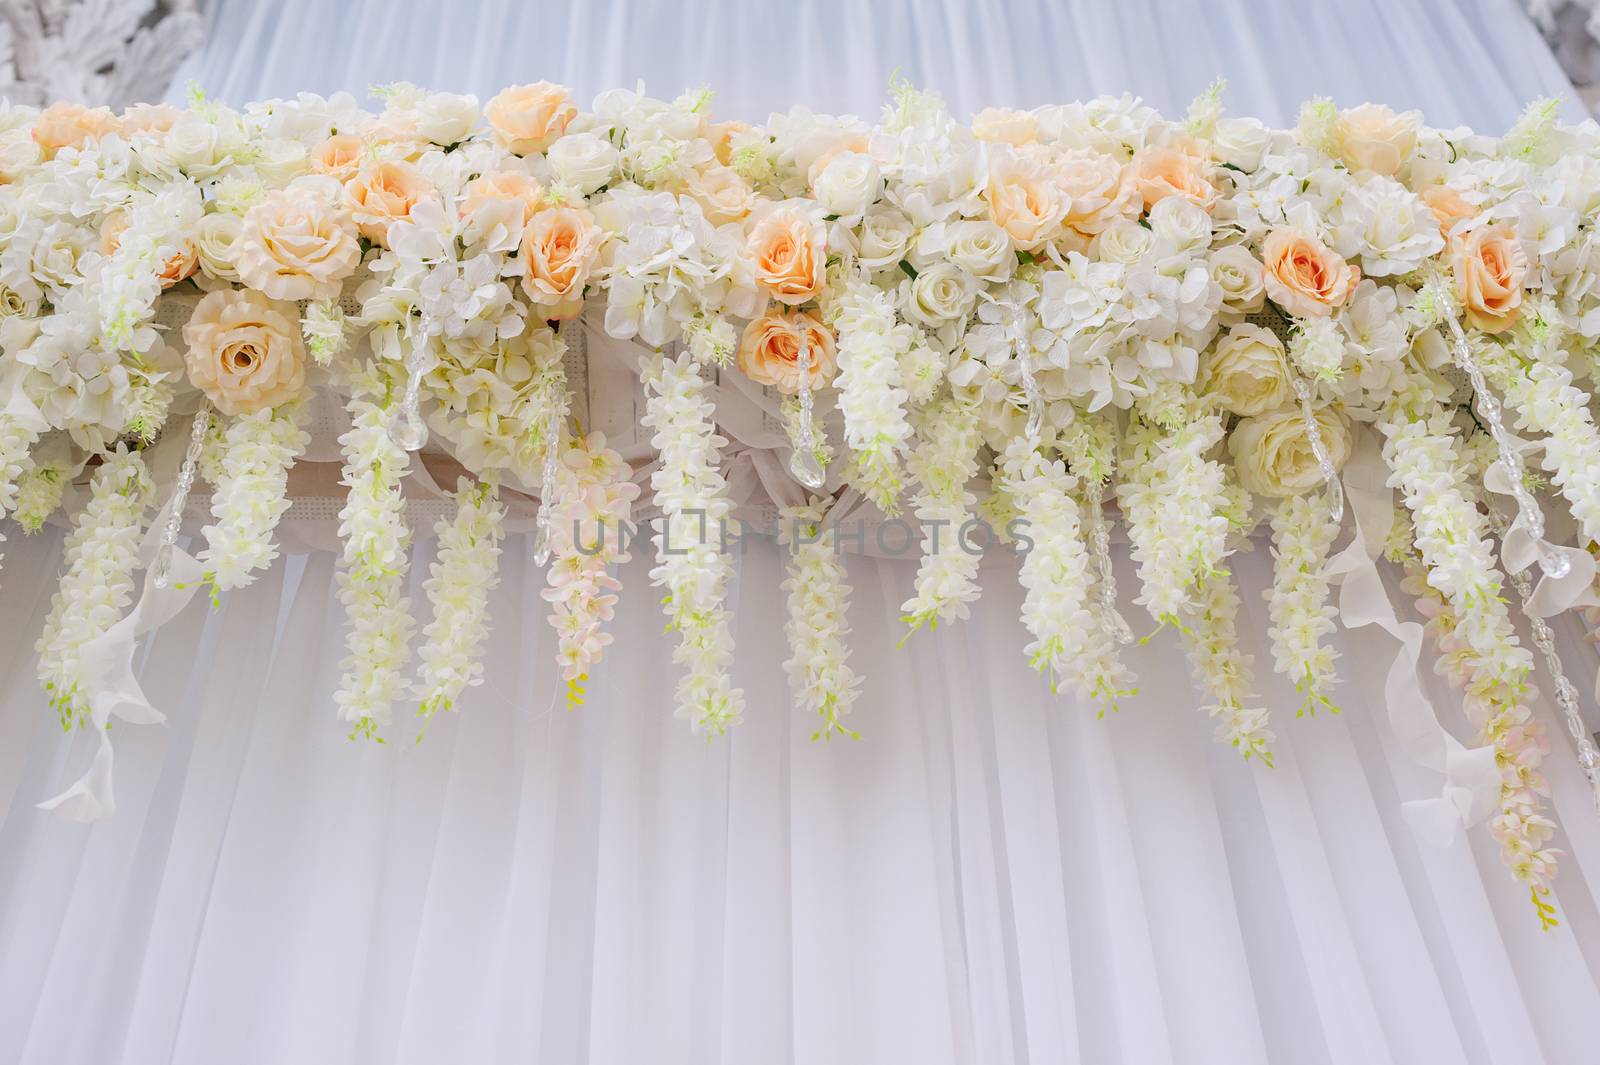 beautiful arch with white roses for wedding ceremony by timonko